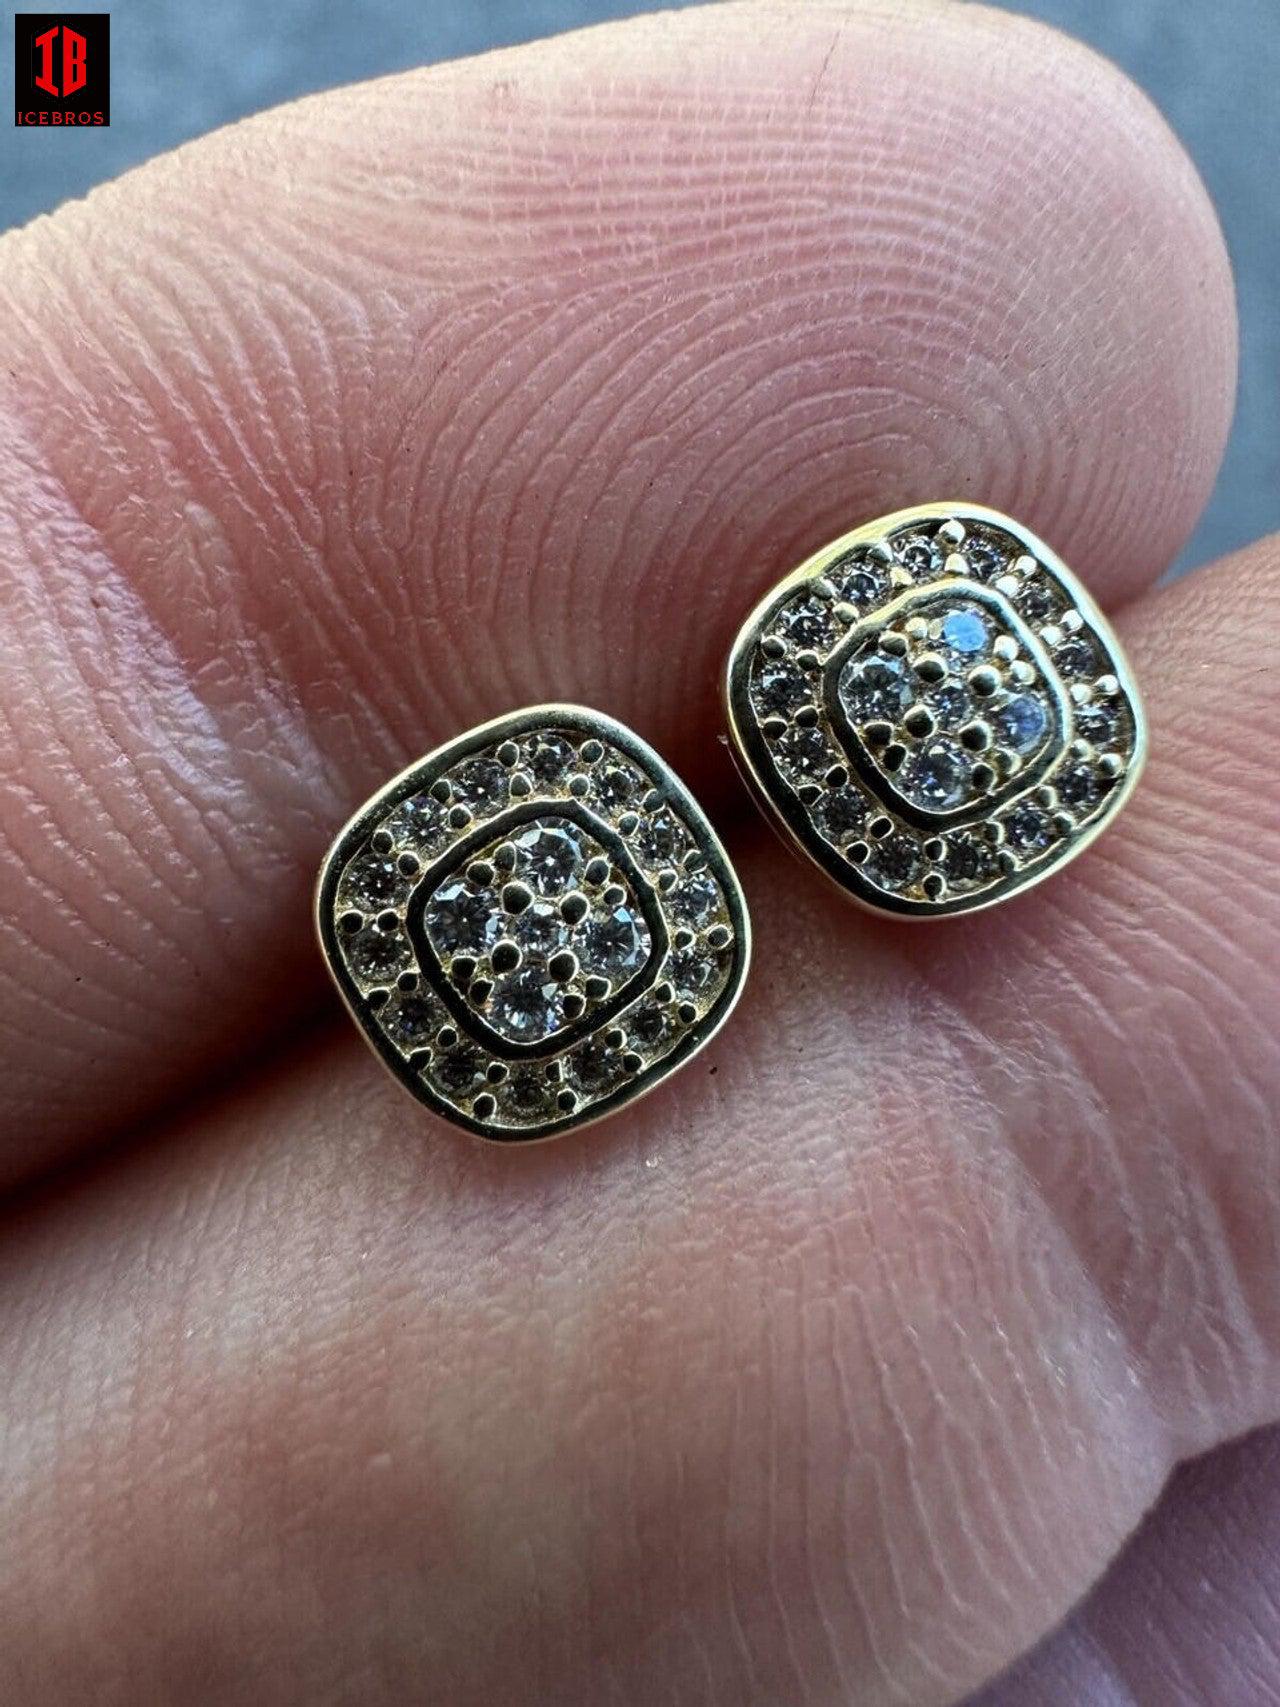 Real Solid 10k Yellow Gold Iced Moissanite Earrings Mens Ladies Small 7mm Studs